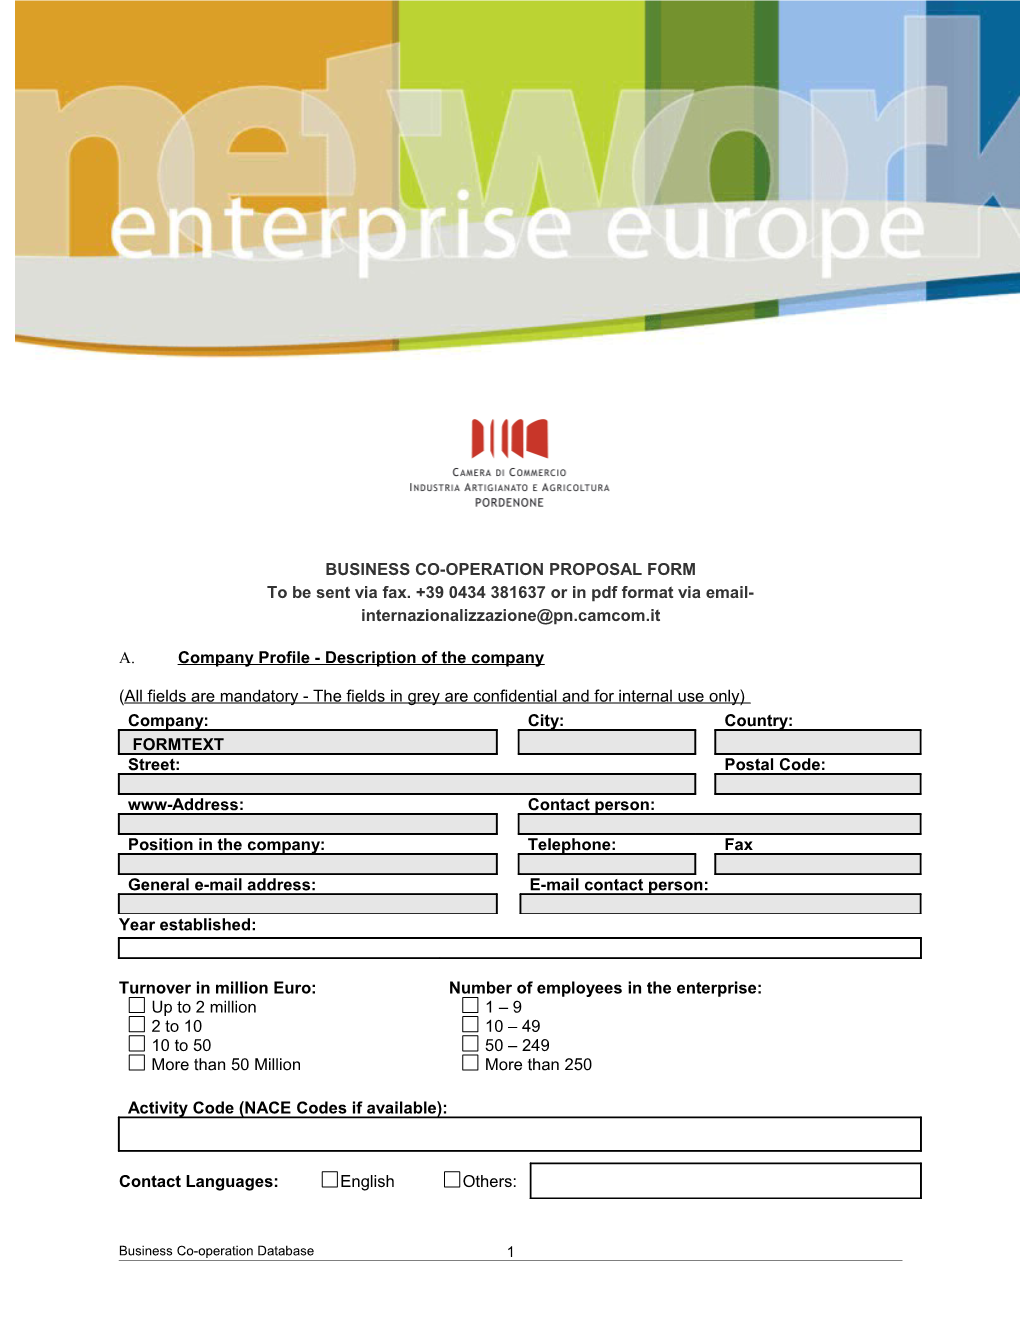 Business Co-Operation Proposal Form